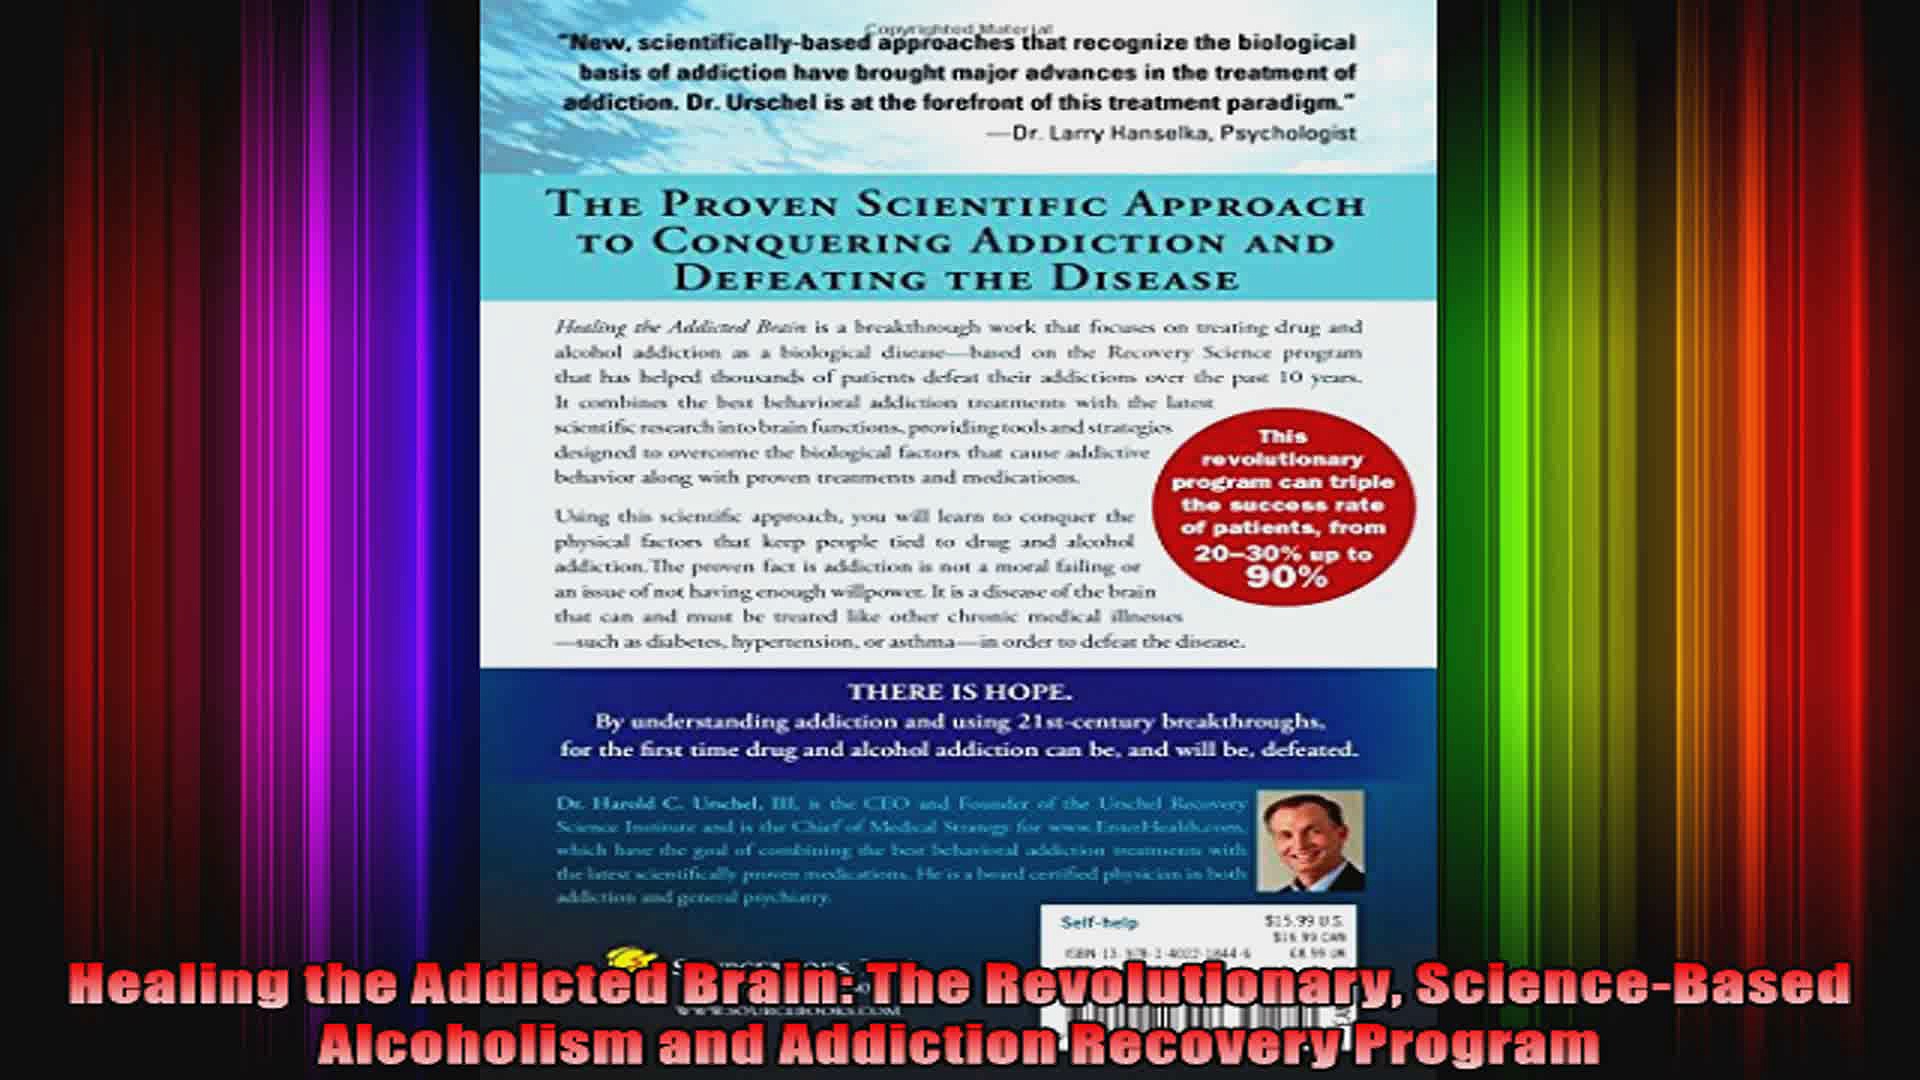 Healing the Addicted Brain The Revolutionary ScienceBased Alcoholism and Addiction